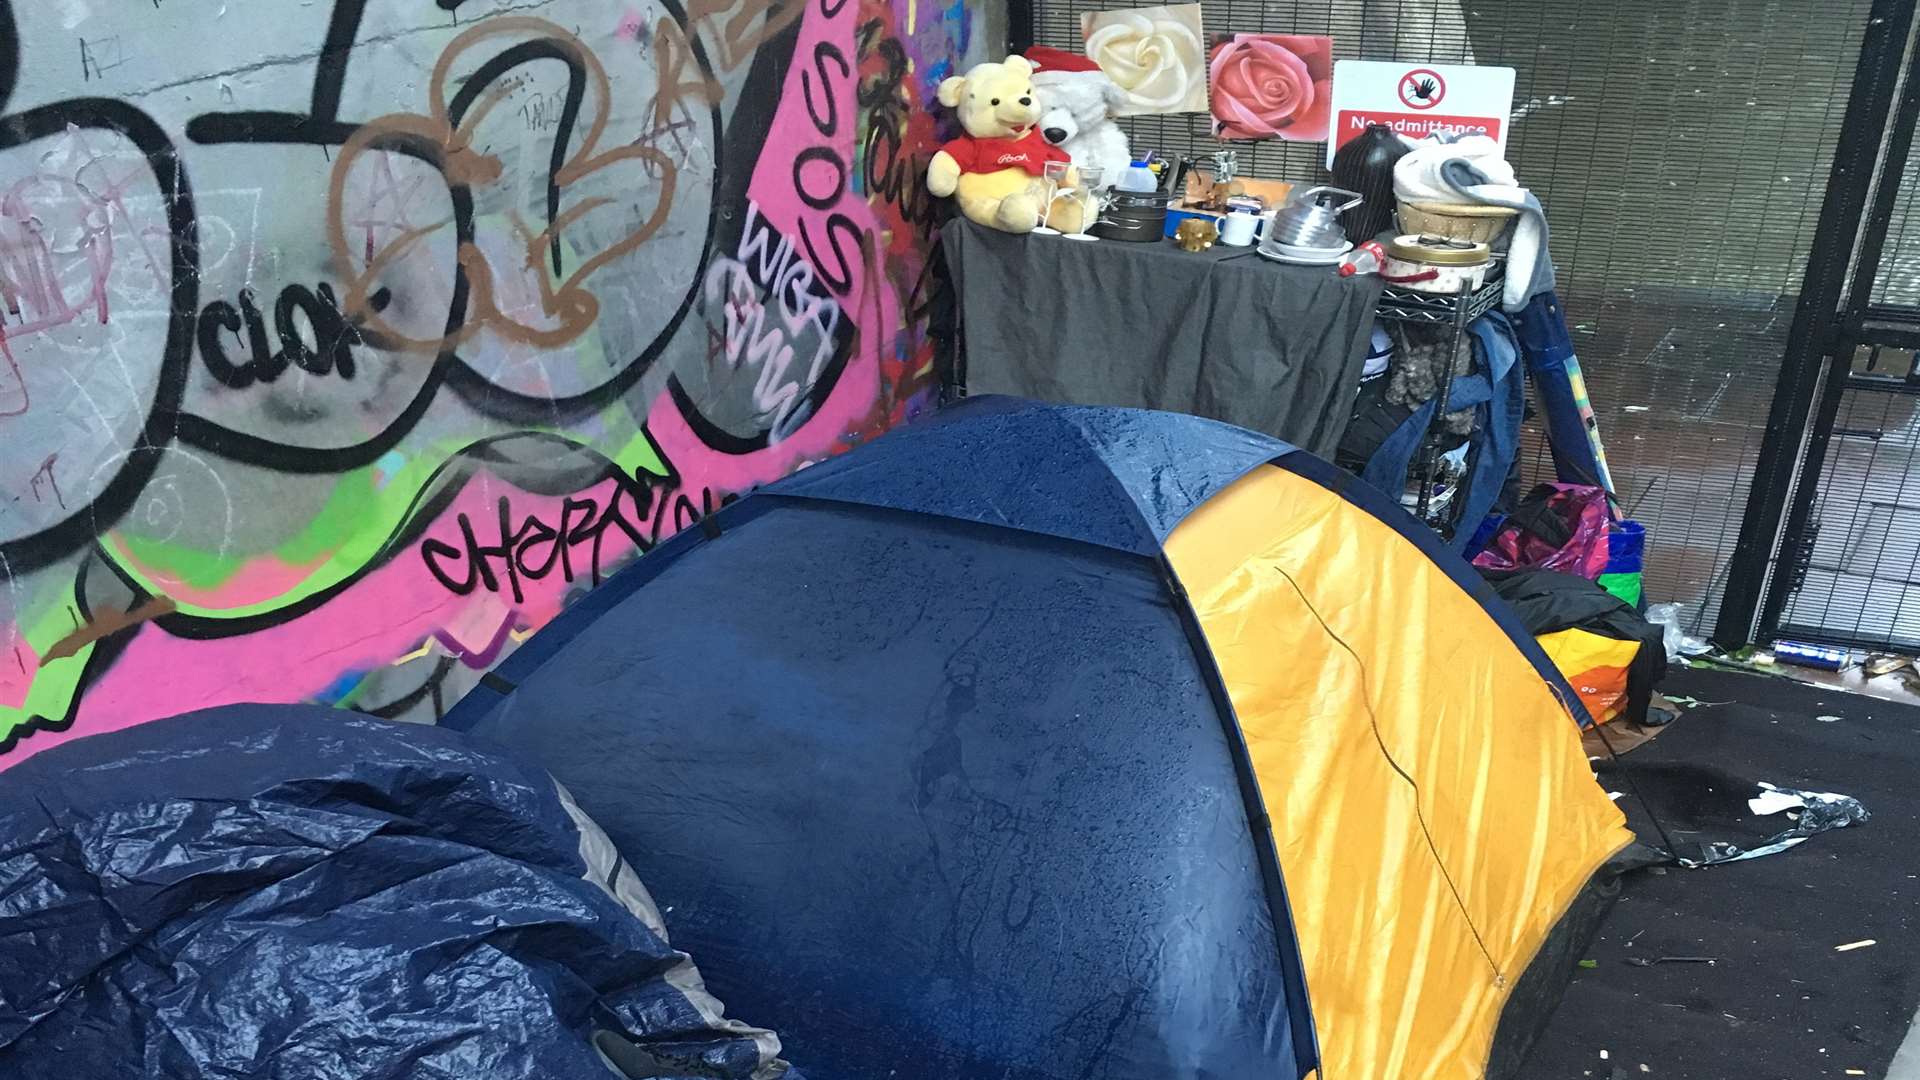 The couple are living in this tent